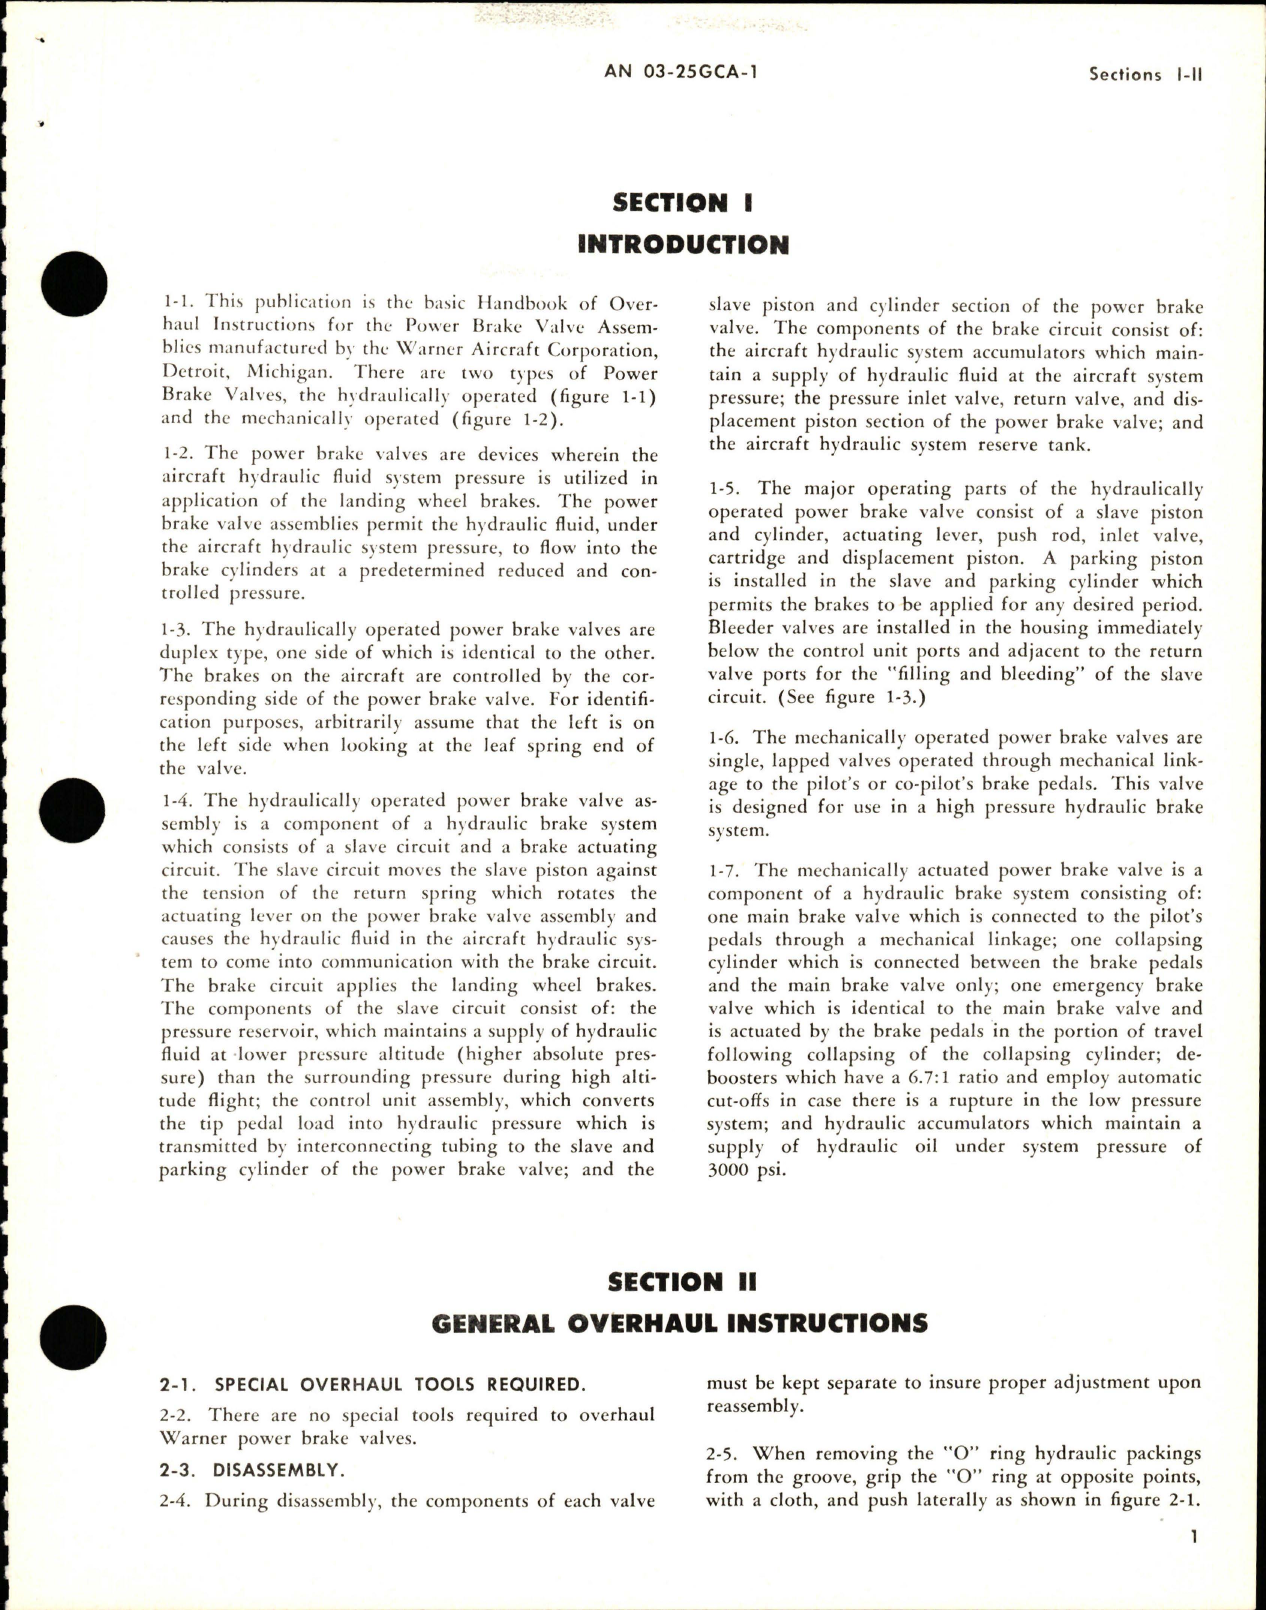 Sample page 5 from AirCorps Library document: Overhaul Instructions for Power Brake Valves - Hydraulic and Mechanical